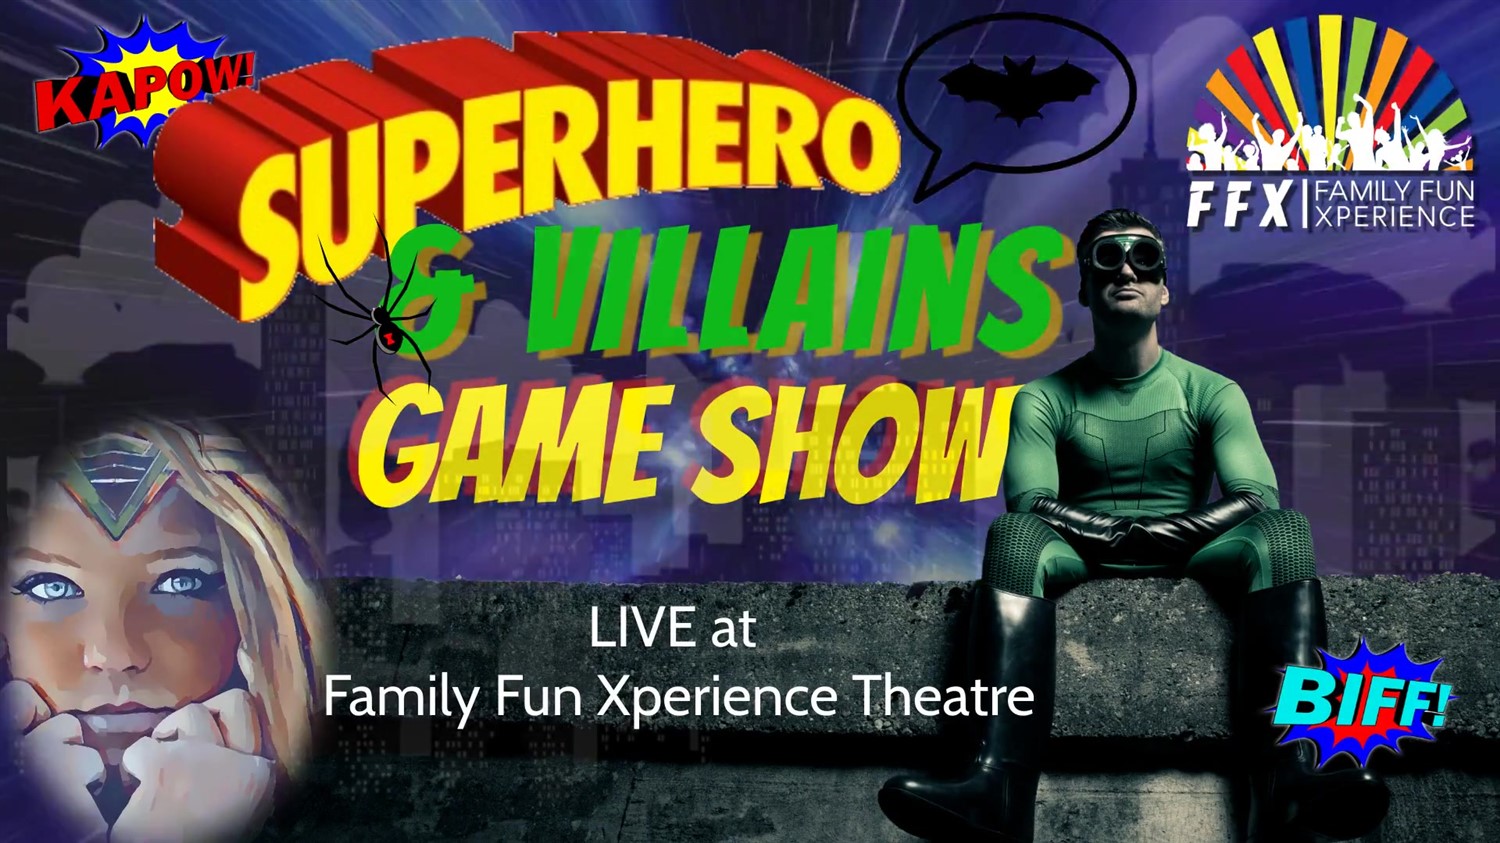 SUPERHEROES & VILLAINS Live Game Show with Special Costume Cosplay Contest! on Oct 26, 19:00@FFX Theatre - Pick a seat, Buy tickets and Get information on Family Fun Xperience tickets.ffxshow.org